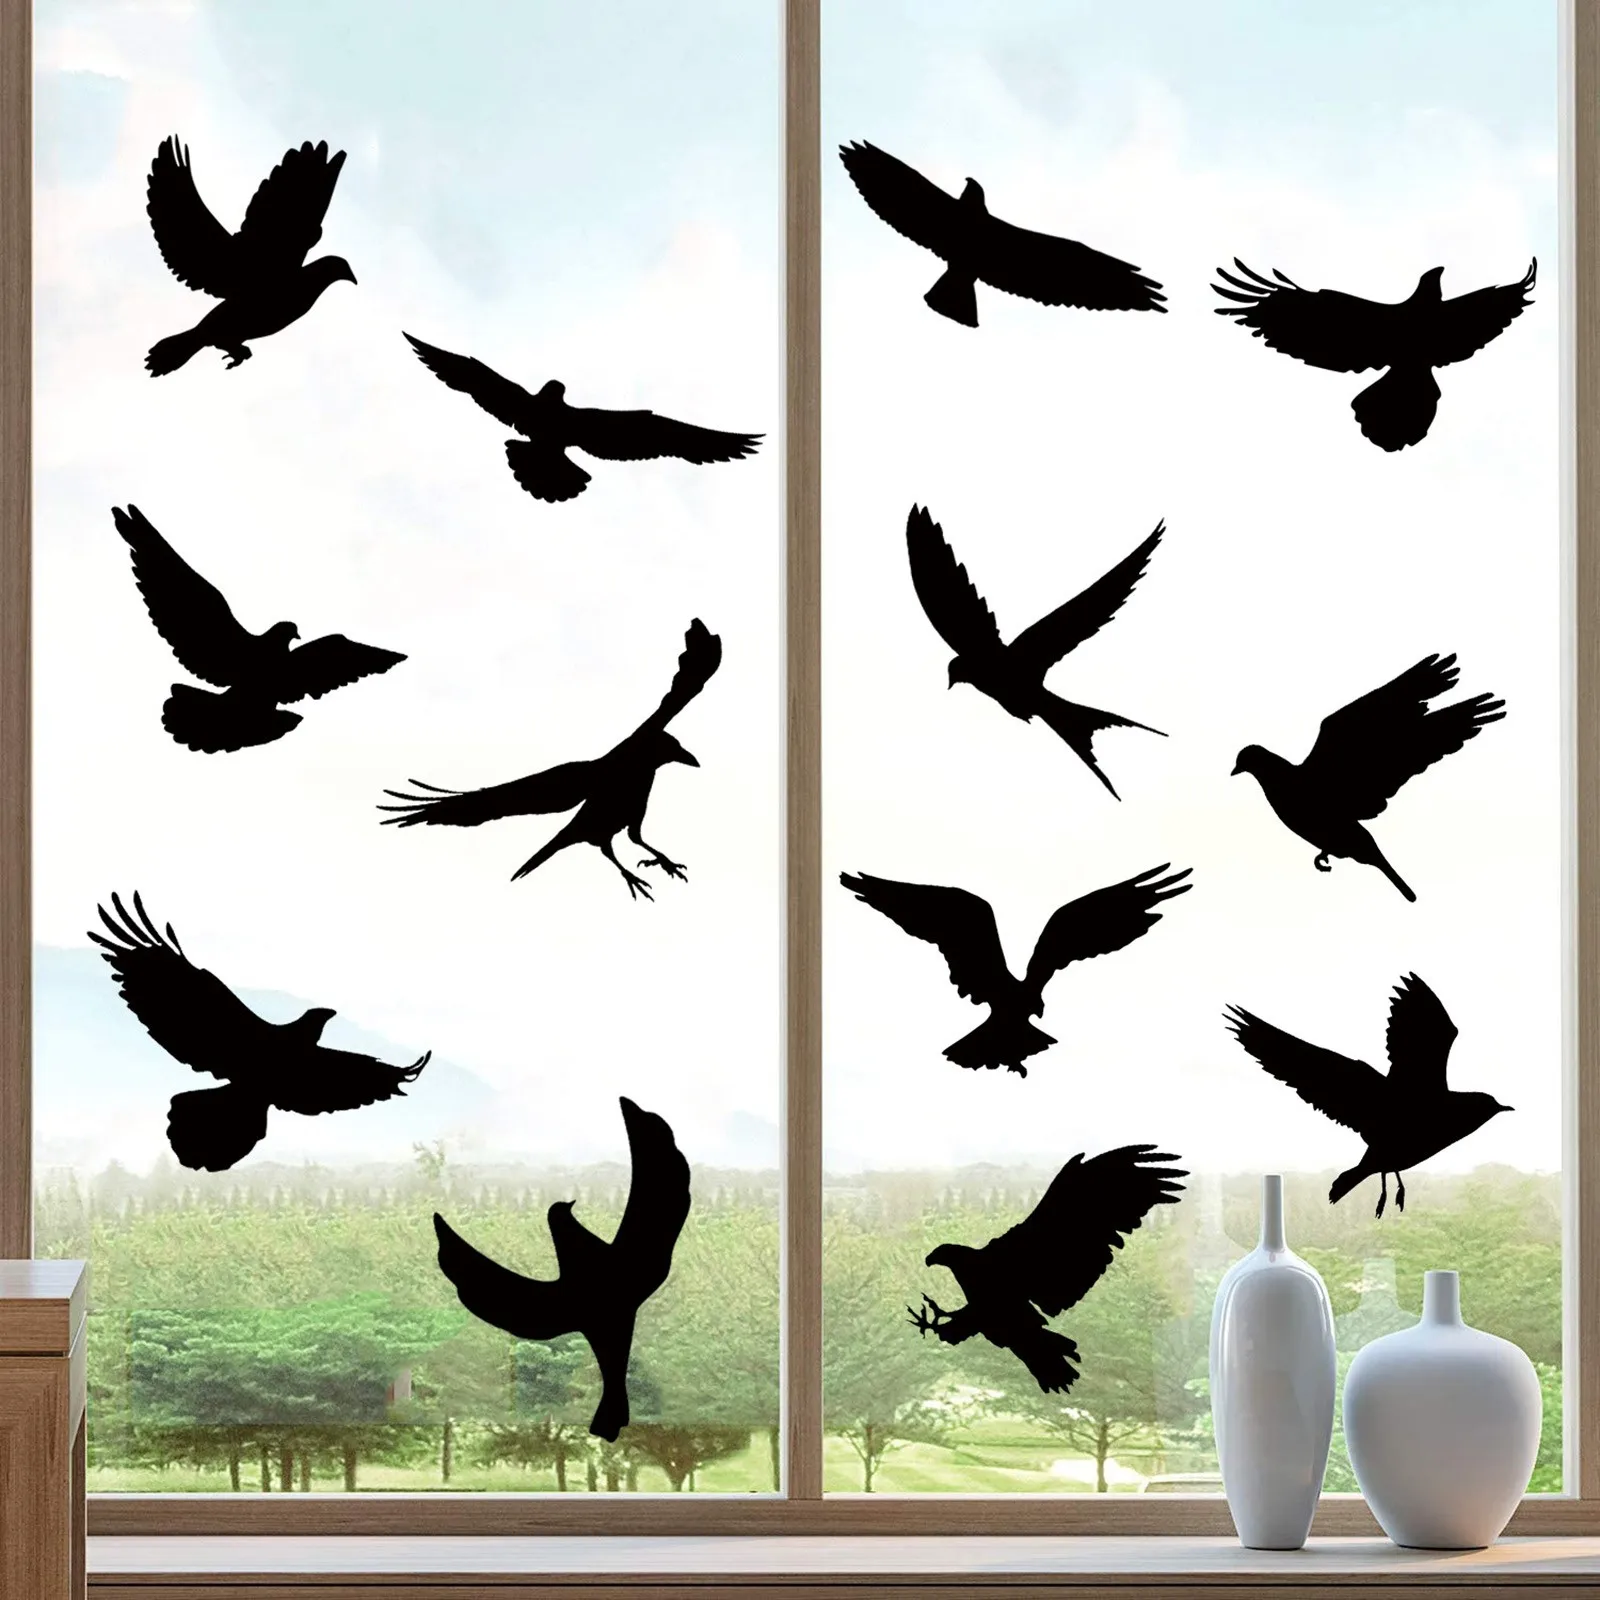 

Anti-collision Black Bird Glass Windows Sticker Static Electricity Removable Windows Grille Warnings Wall Sticker Home Decor Top